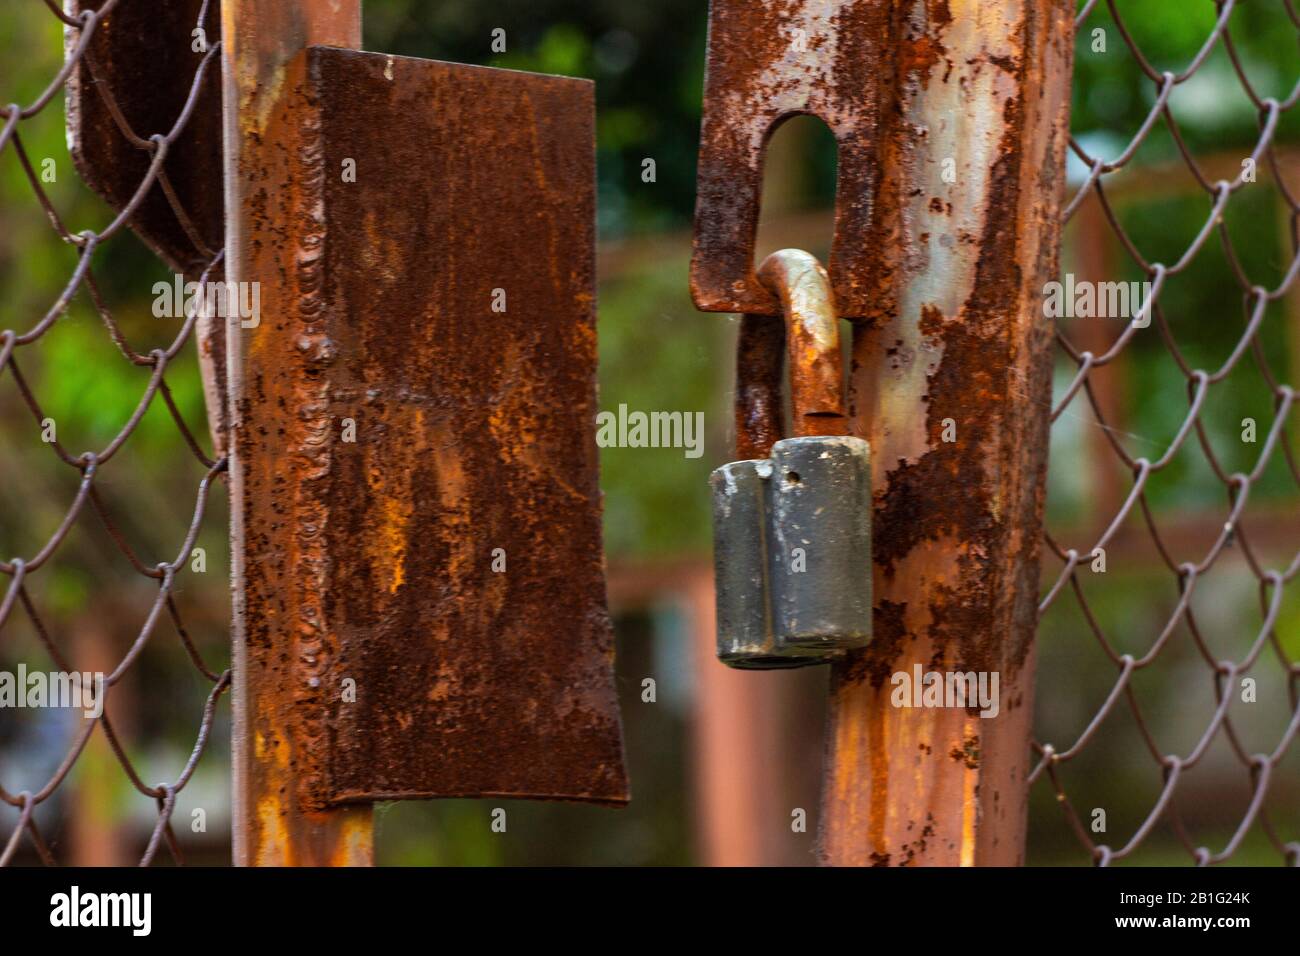 Rusty old lock. Locked padlock on metal grate. Concept - stolen things or unsecure data system Stock Photo